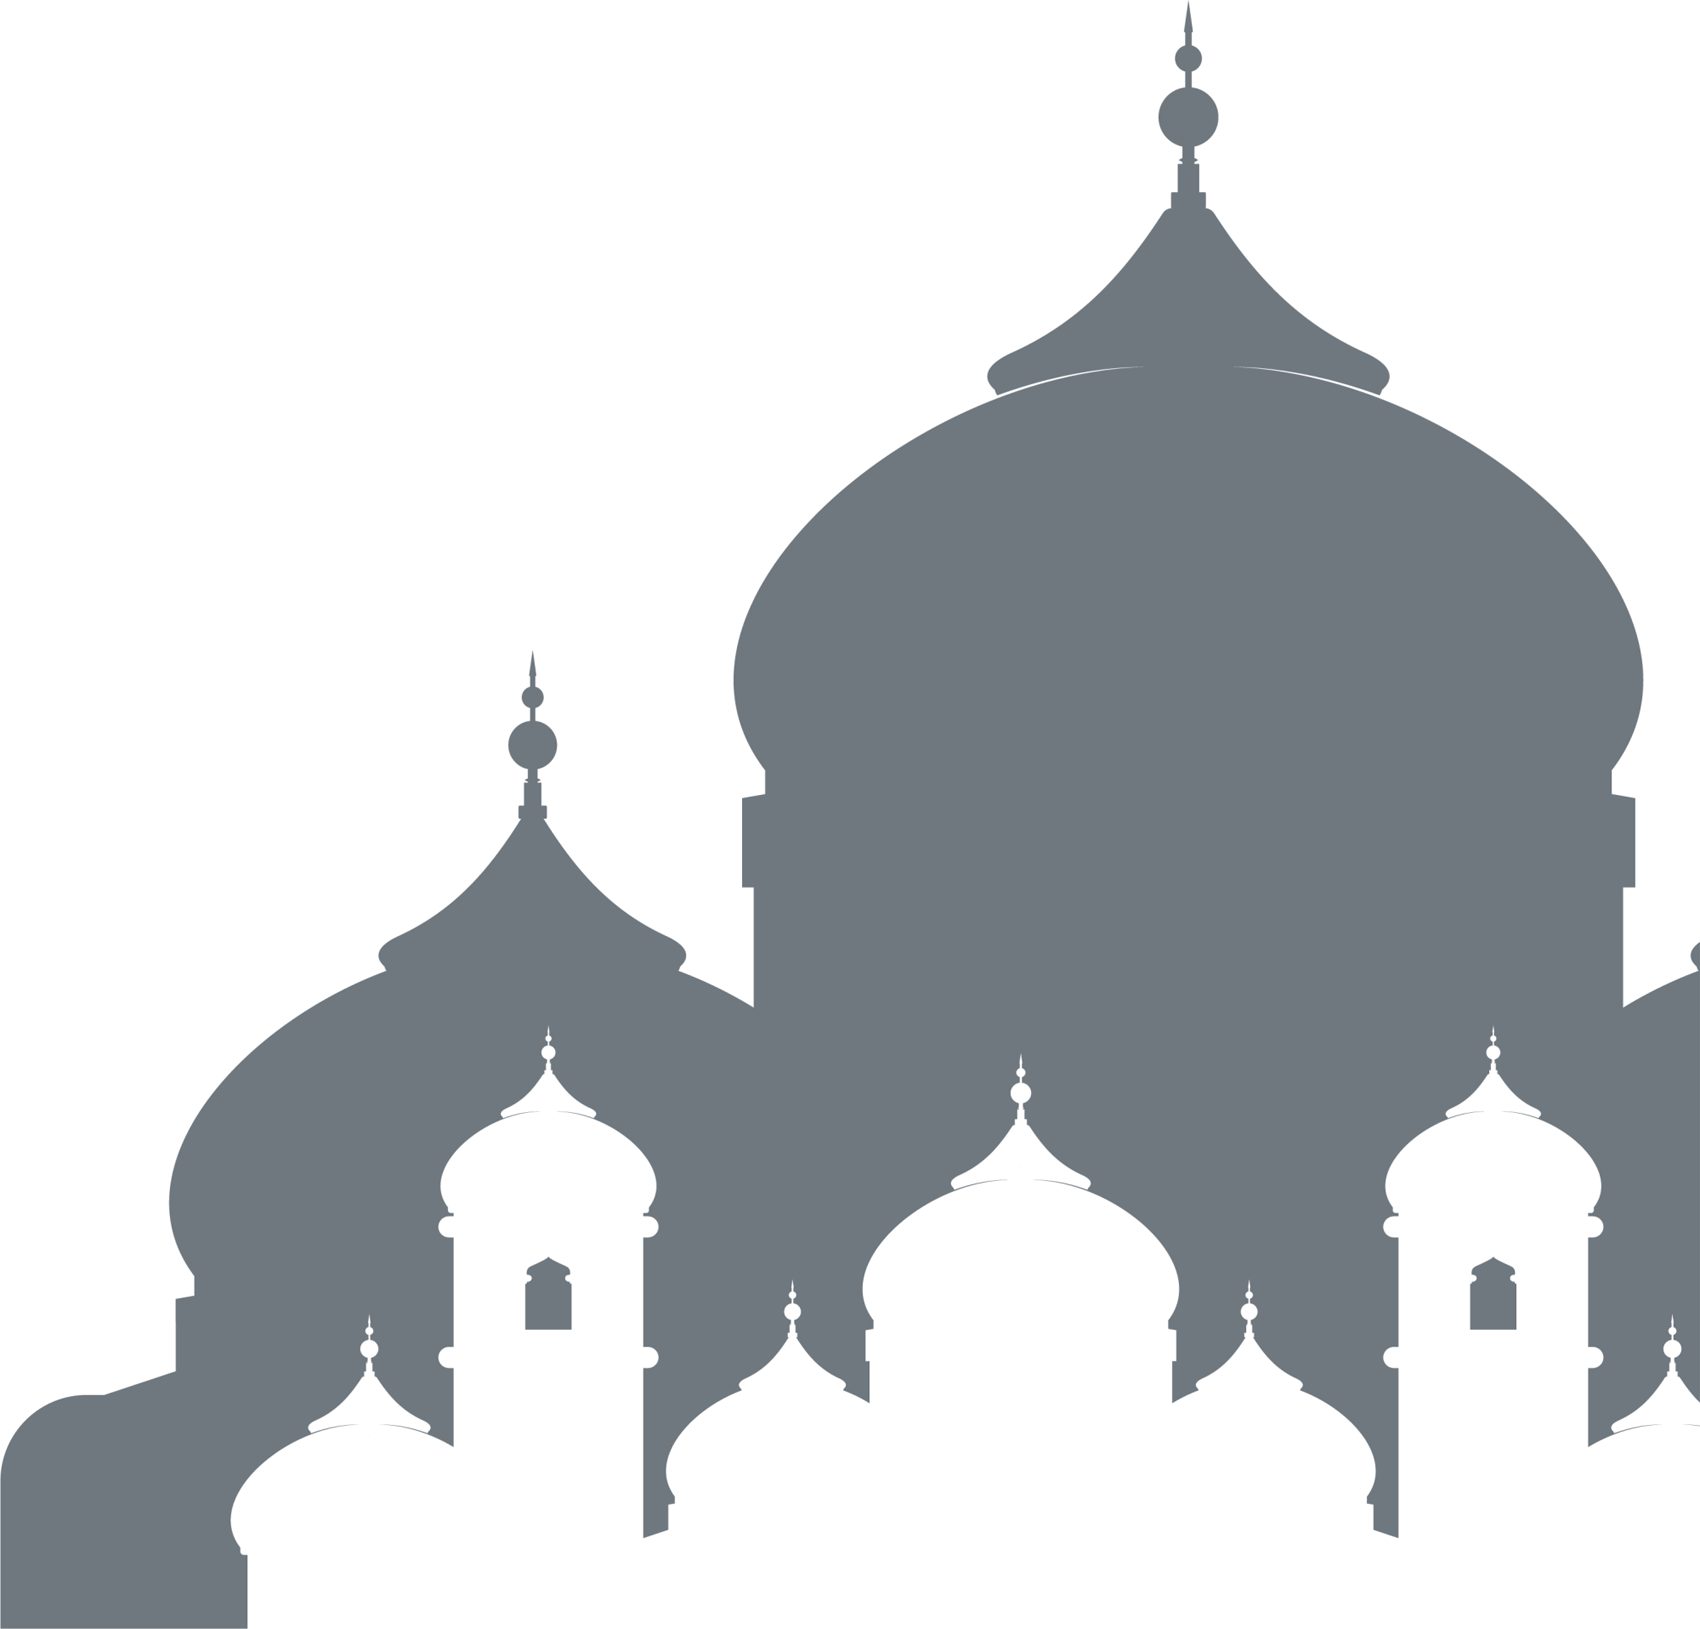 Islamic Silhouette Mosque Domes